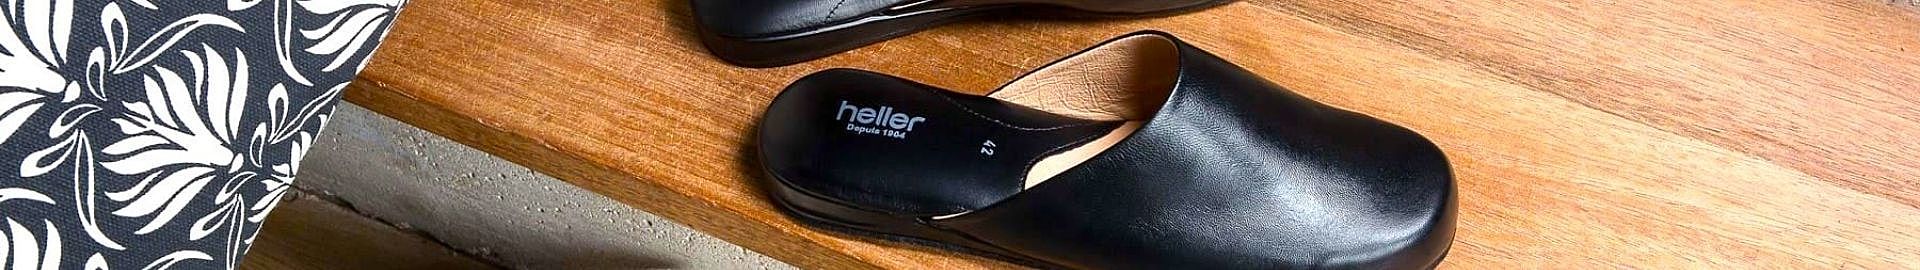 Chaussures Heller pour hommes